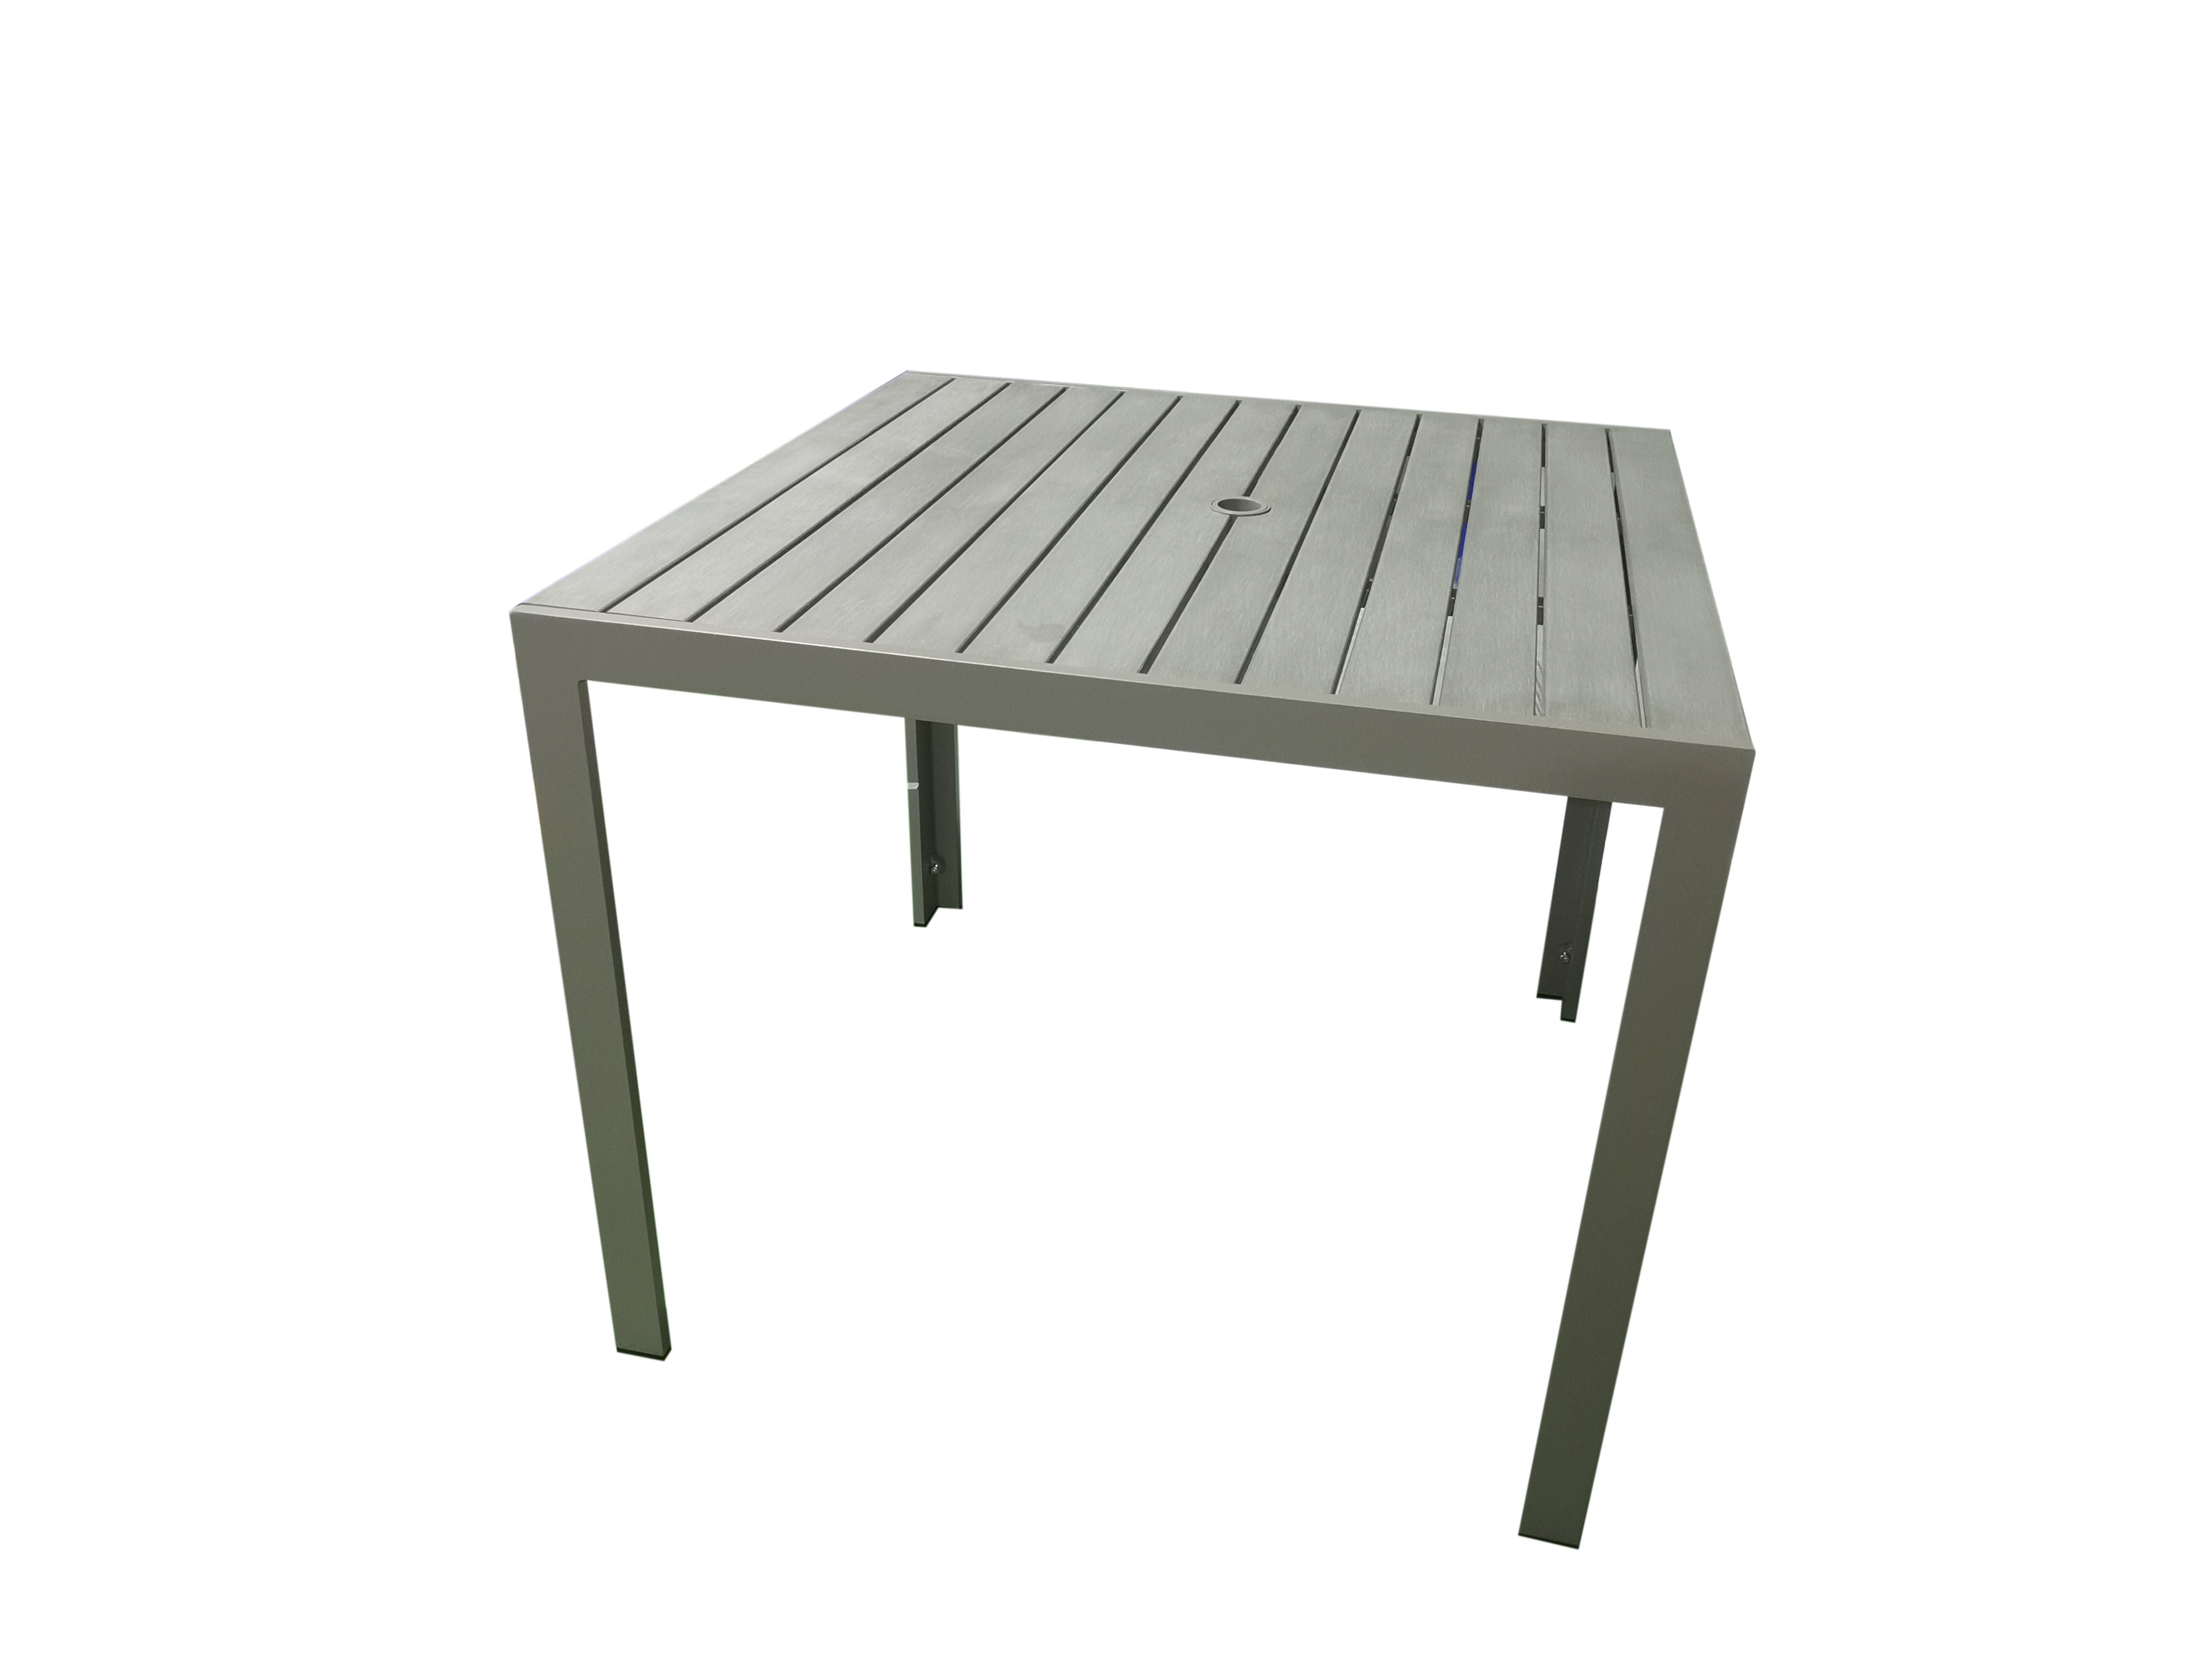 PatioZone Square Condo Table with Polywood Slats Tabletop w/ Umbrella Hole and Aluminum Frame (MOSS-T302T) - Matte Taupe